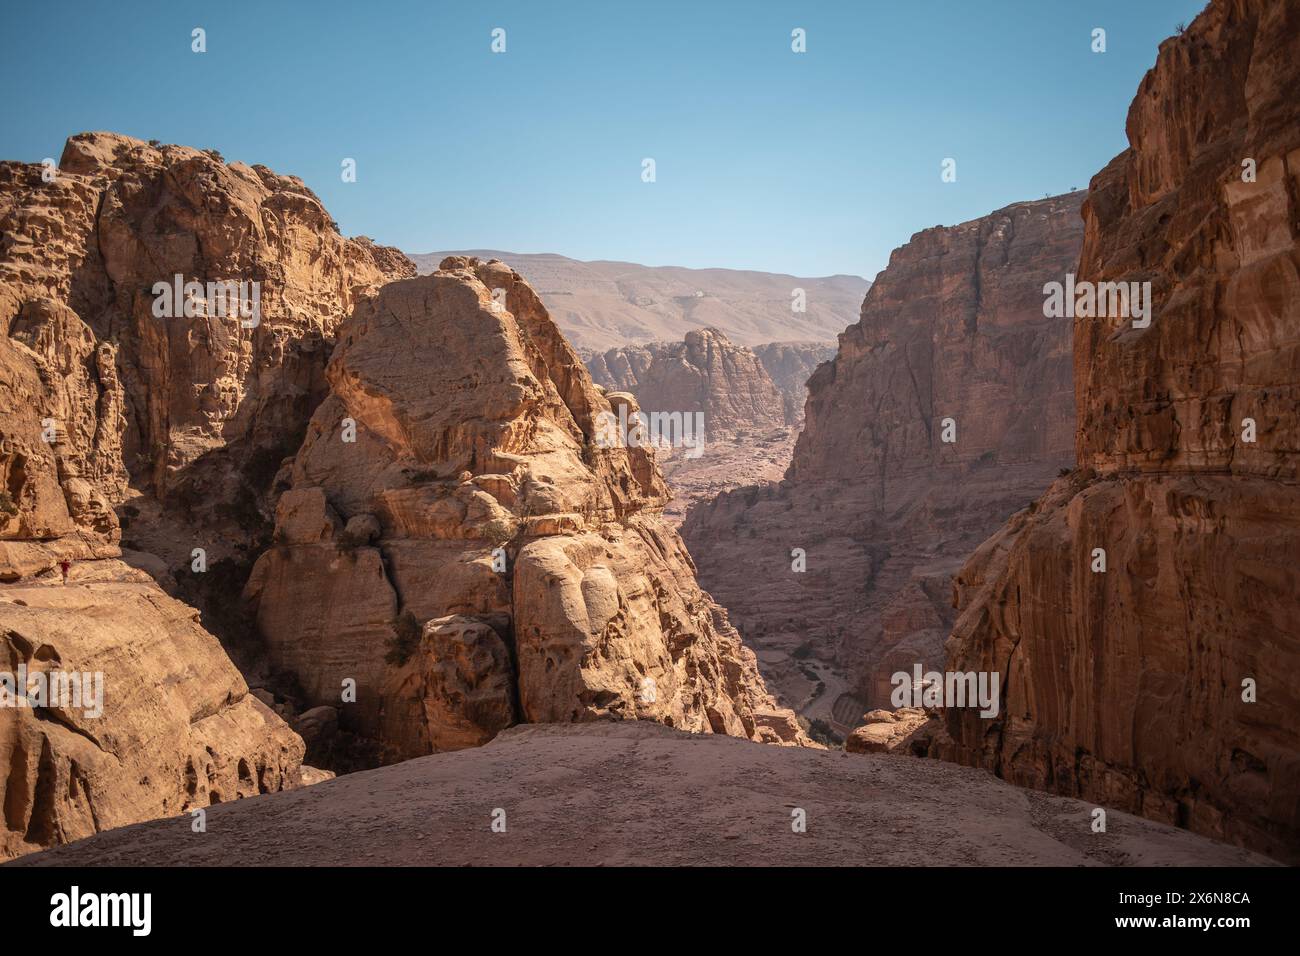 Scenic Landscape of Rocky Canyon in Jordan. Beautiful View of Stones in Ad Deir Trail in Petra. Middle East Scenery with Stone Rock Formations. Stock Photo